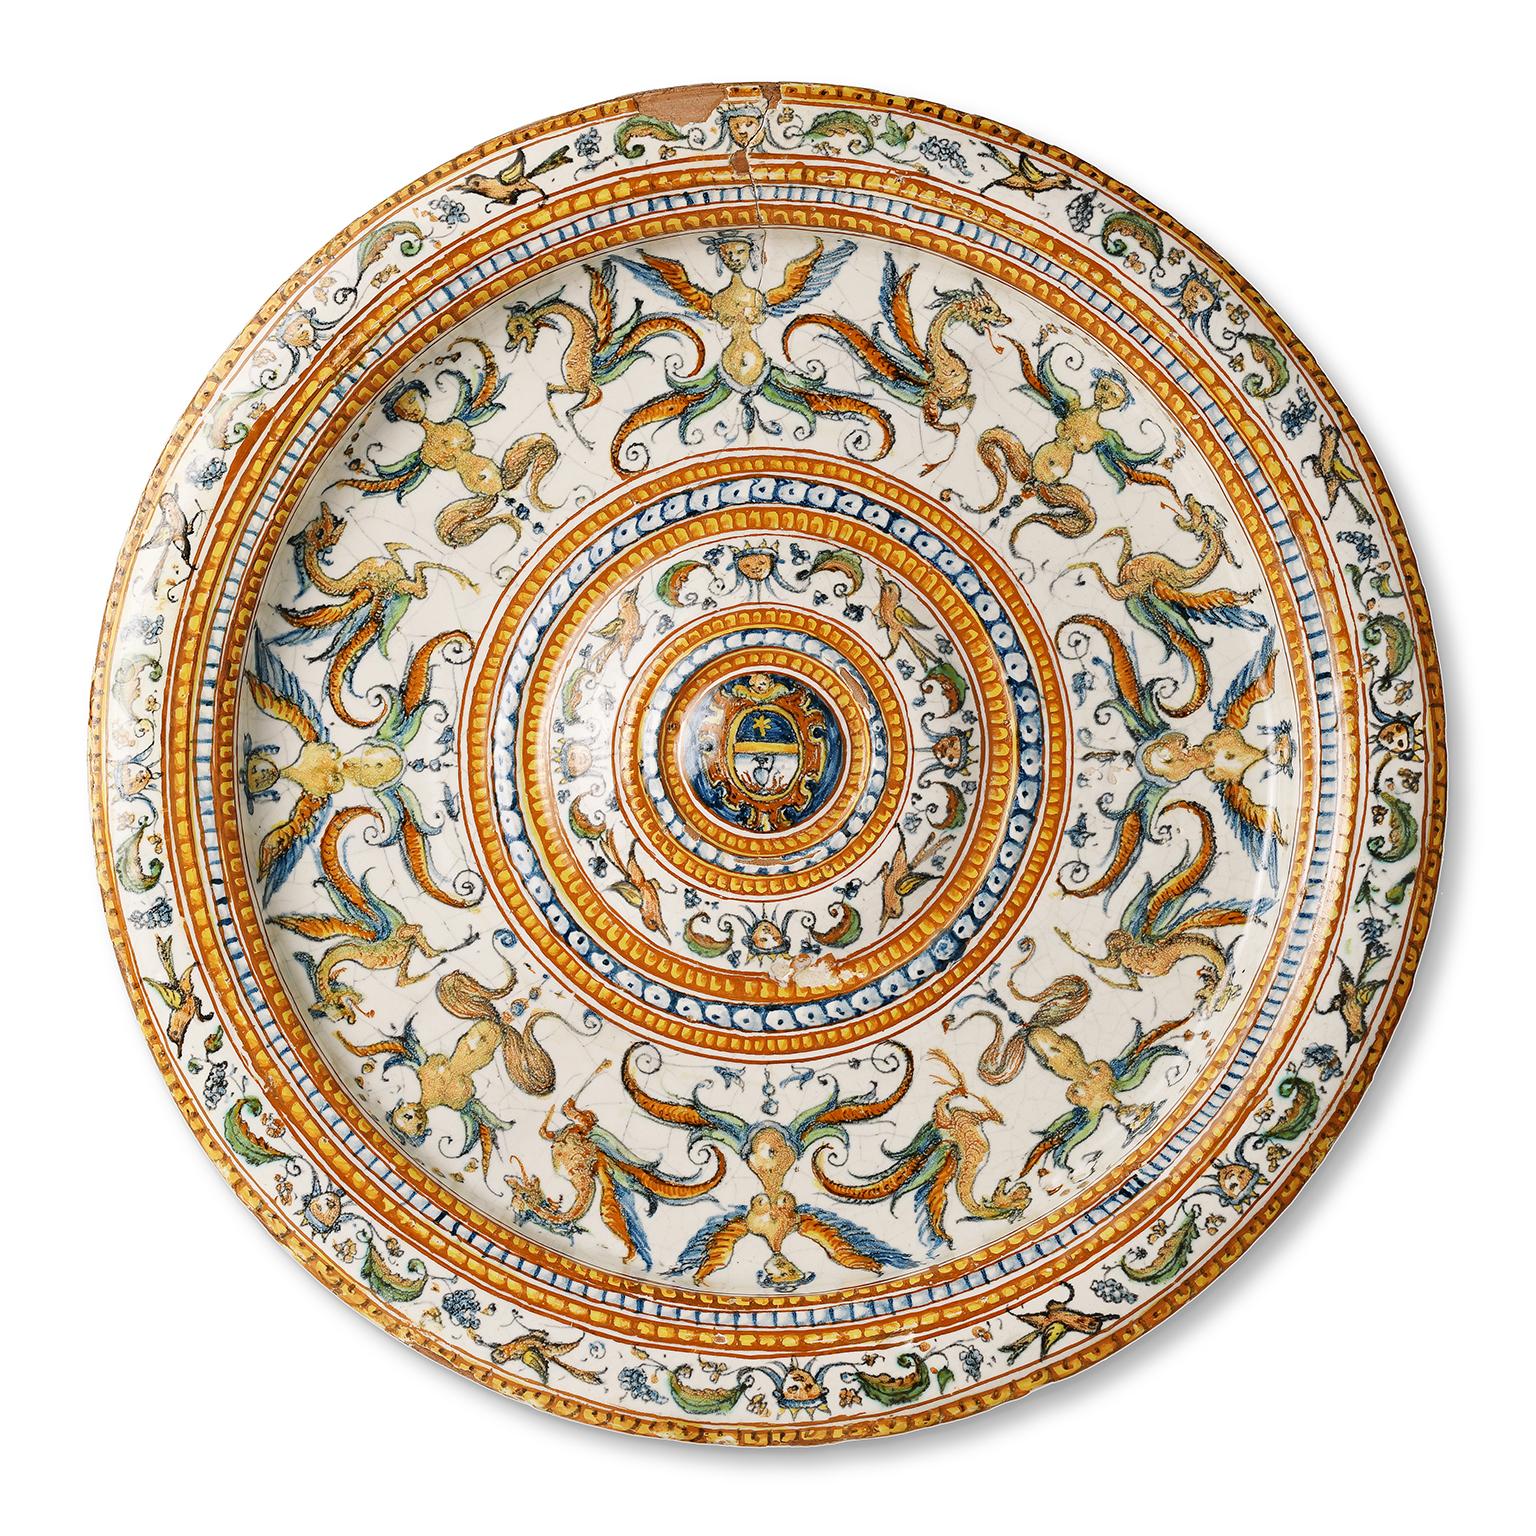 Acquareccia plate
Patanazzi workshop
Urbino, last quarter of the 16th century
It measures diameter 17.12 in; foot diameter 11.53 in; height 1.88 in (43.5 cm; 29.3 cm; 4.8 cm).
Weight

State of conservation: wear and a few small minimal detachments